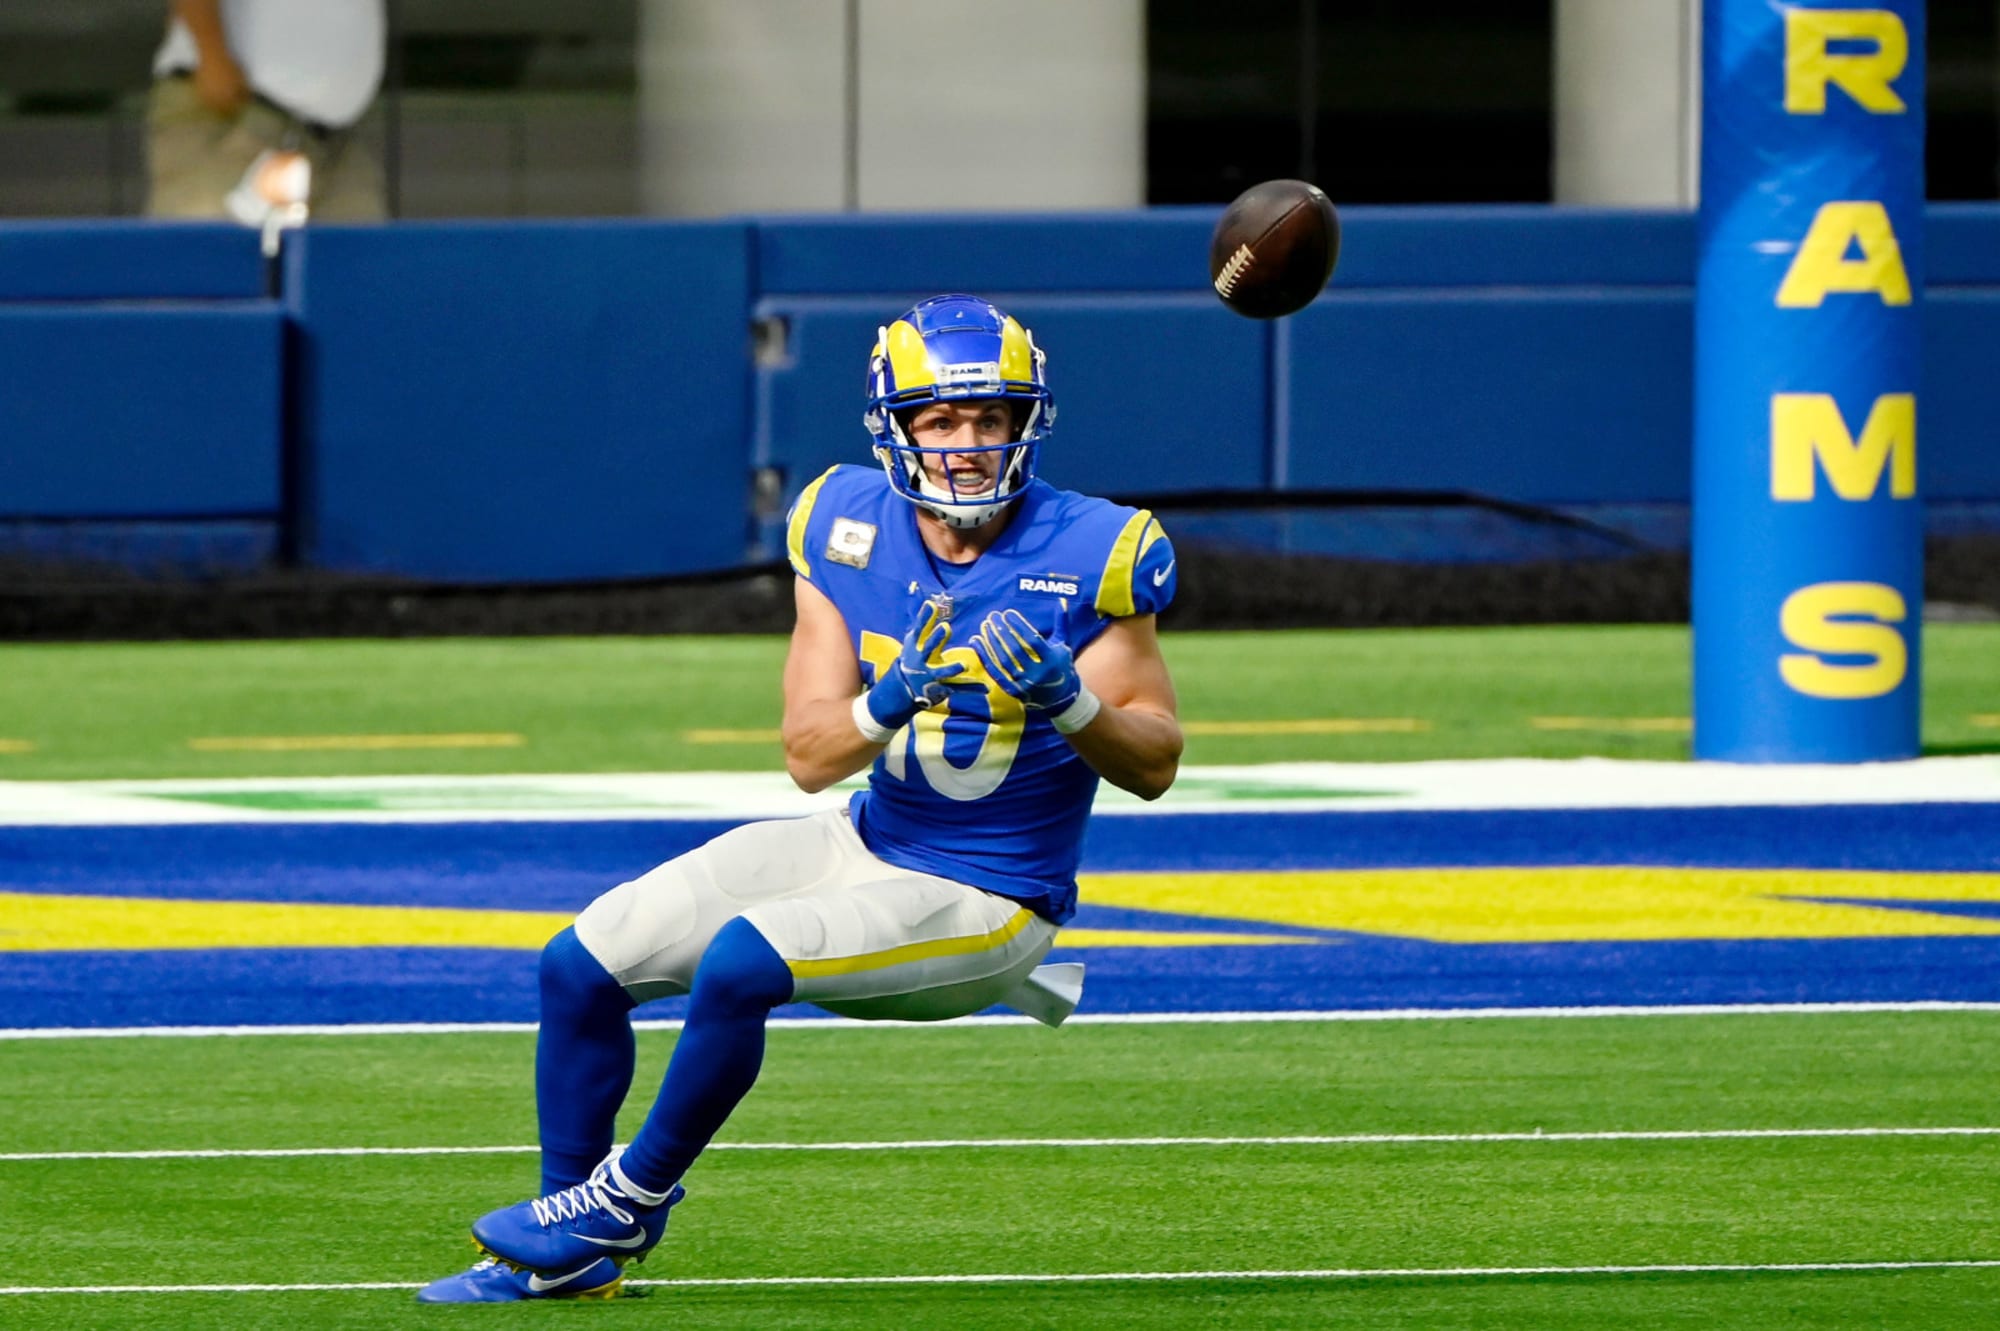 3 reasons why LA Rams WR Cooper Kupp will lead in receiving yards - Page 3